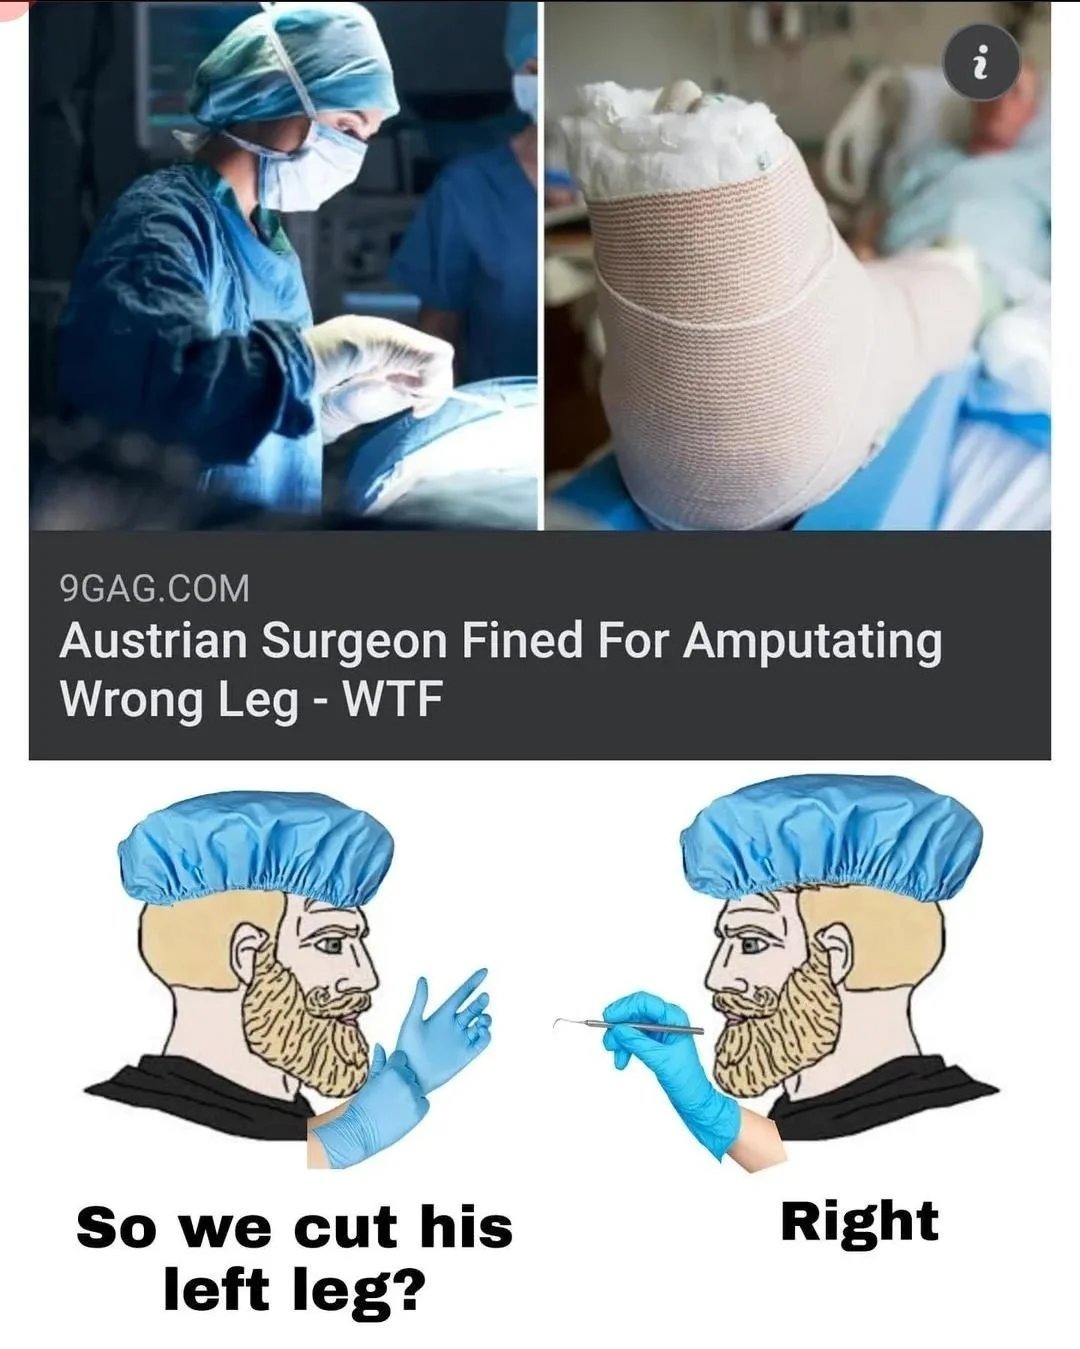 That's some quality healthcare - meme